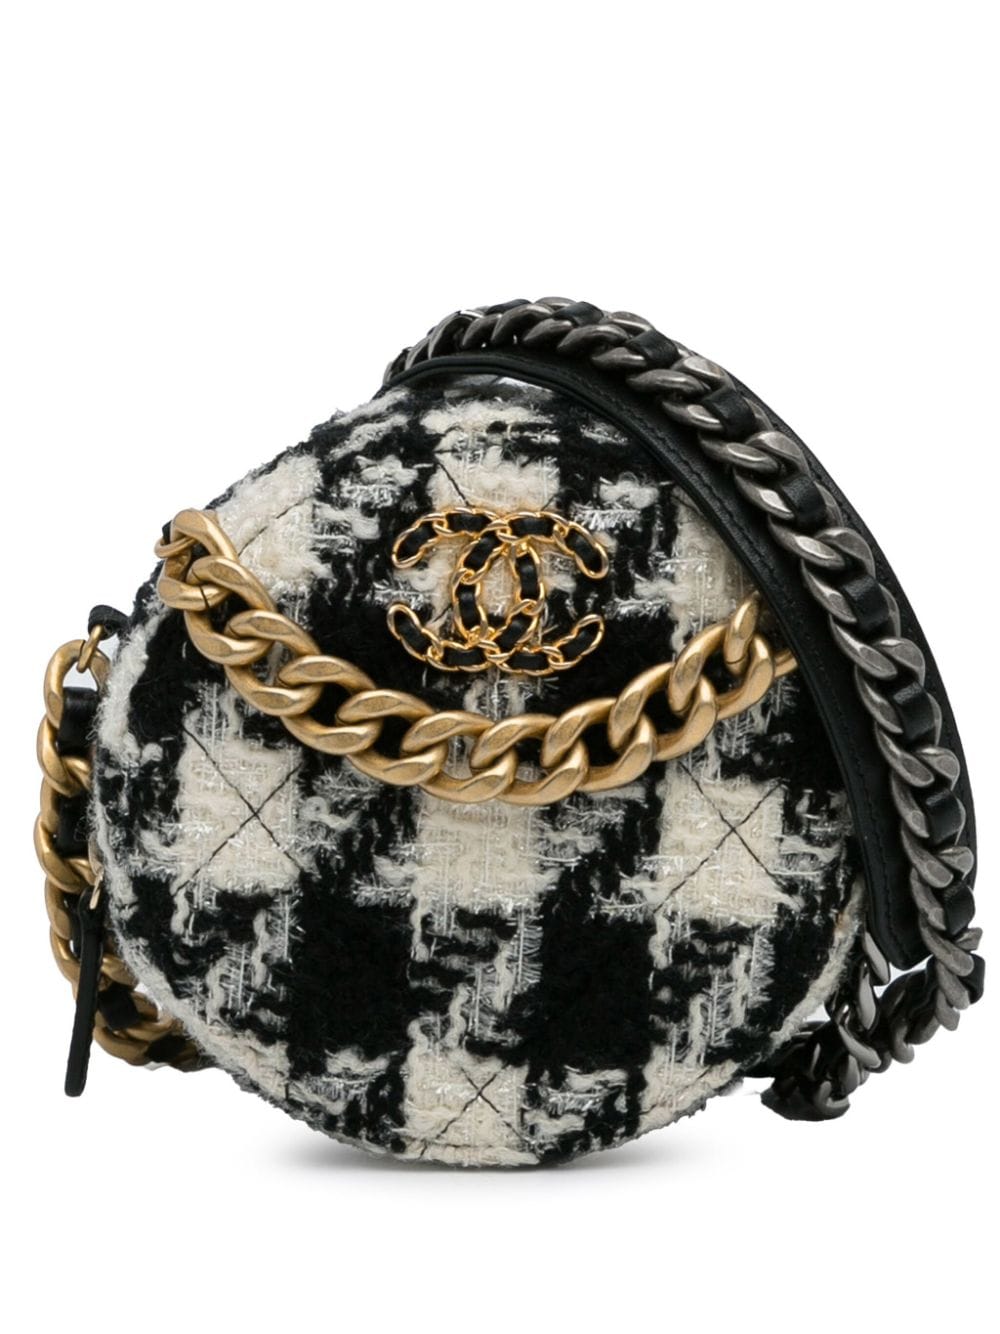 2019 Chanel Round Tweed 19 Clutch with Chain and Lambskin Coin Purse